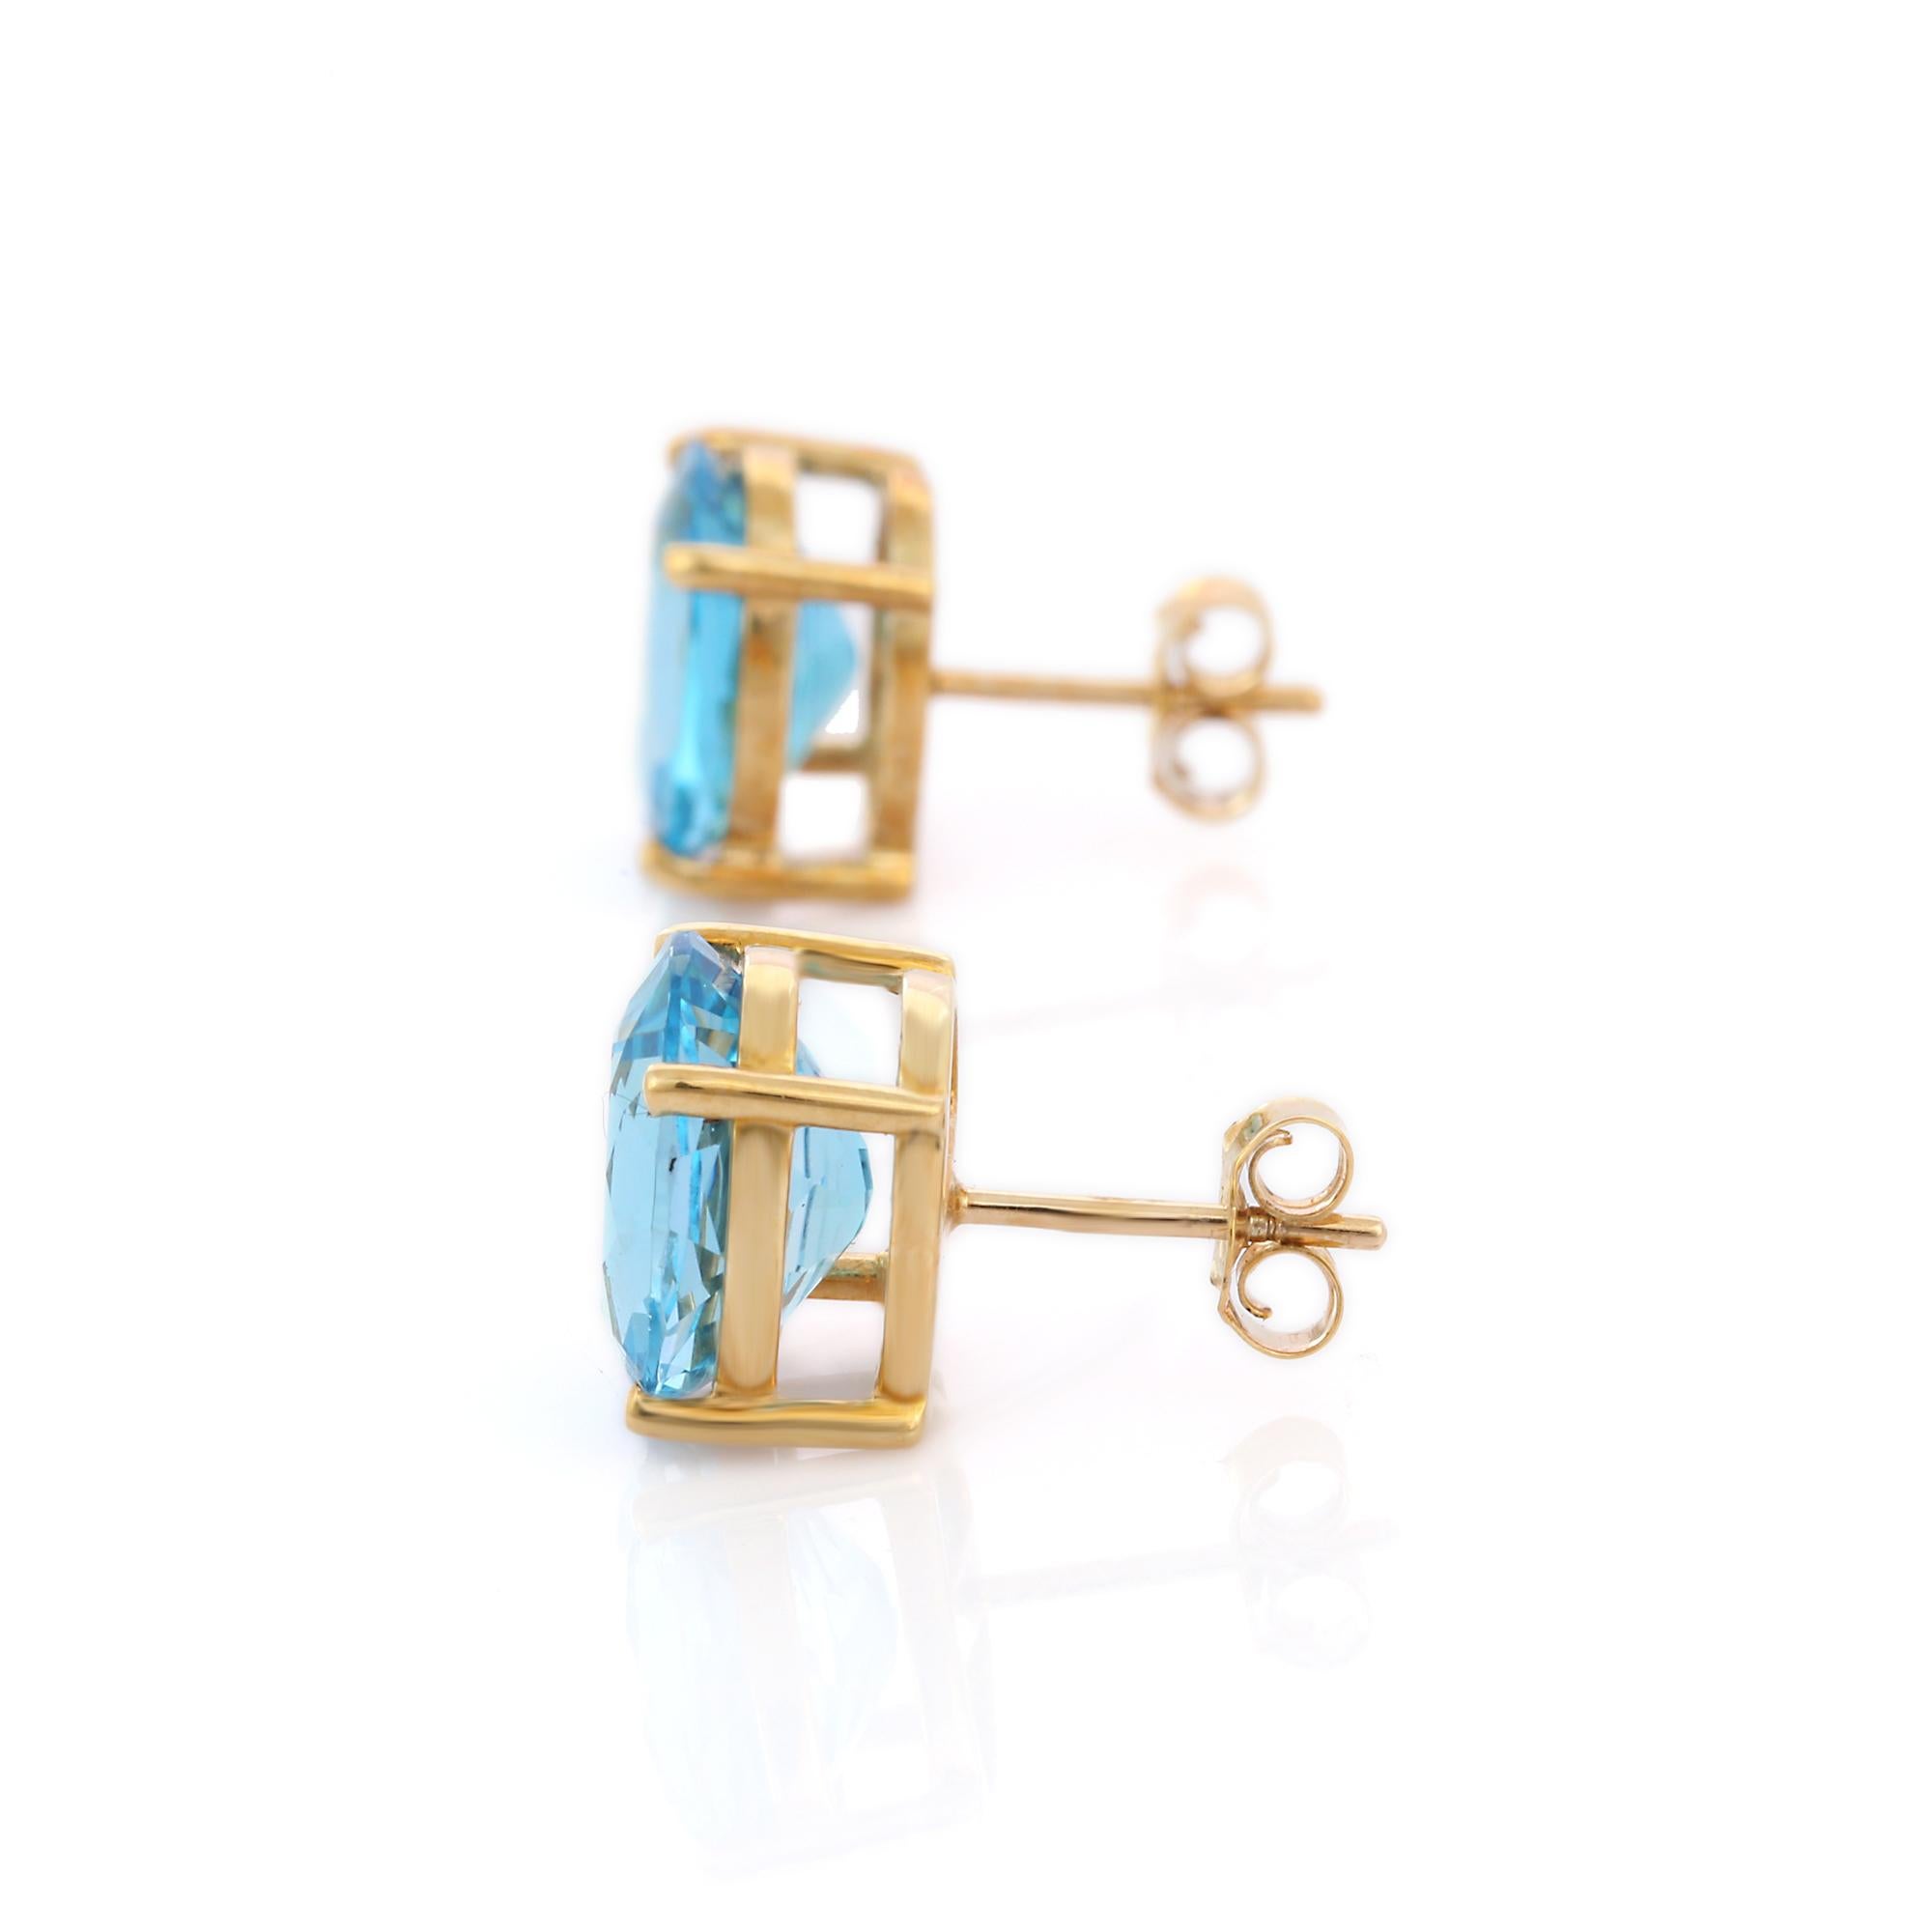 11 Ct Oval Cut Prong Set Blue Topaz Stud Earrings in 10K Yellow Gold  In New Condition For Sale In Houston, TX